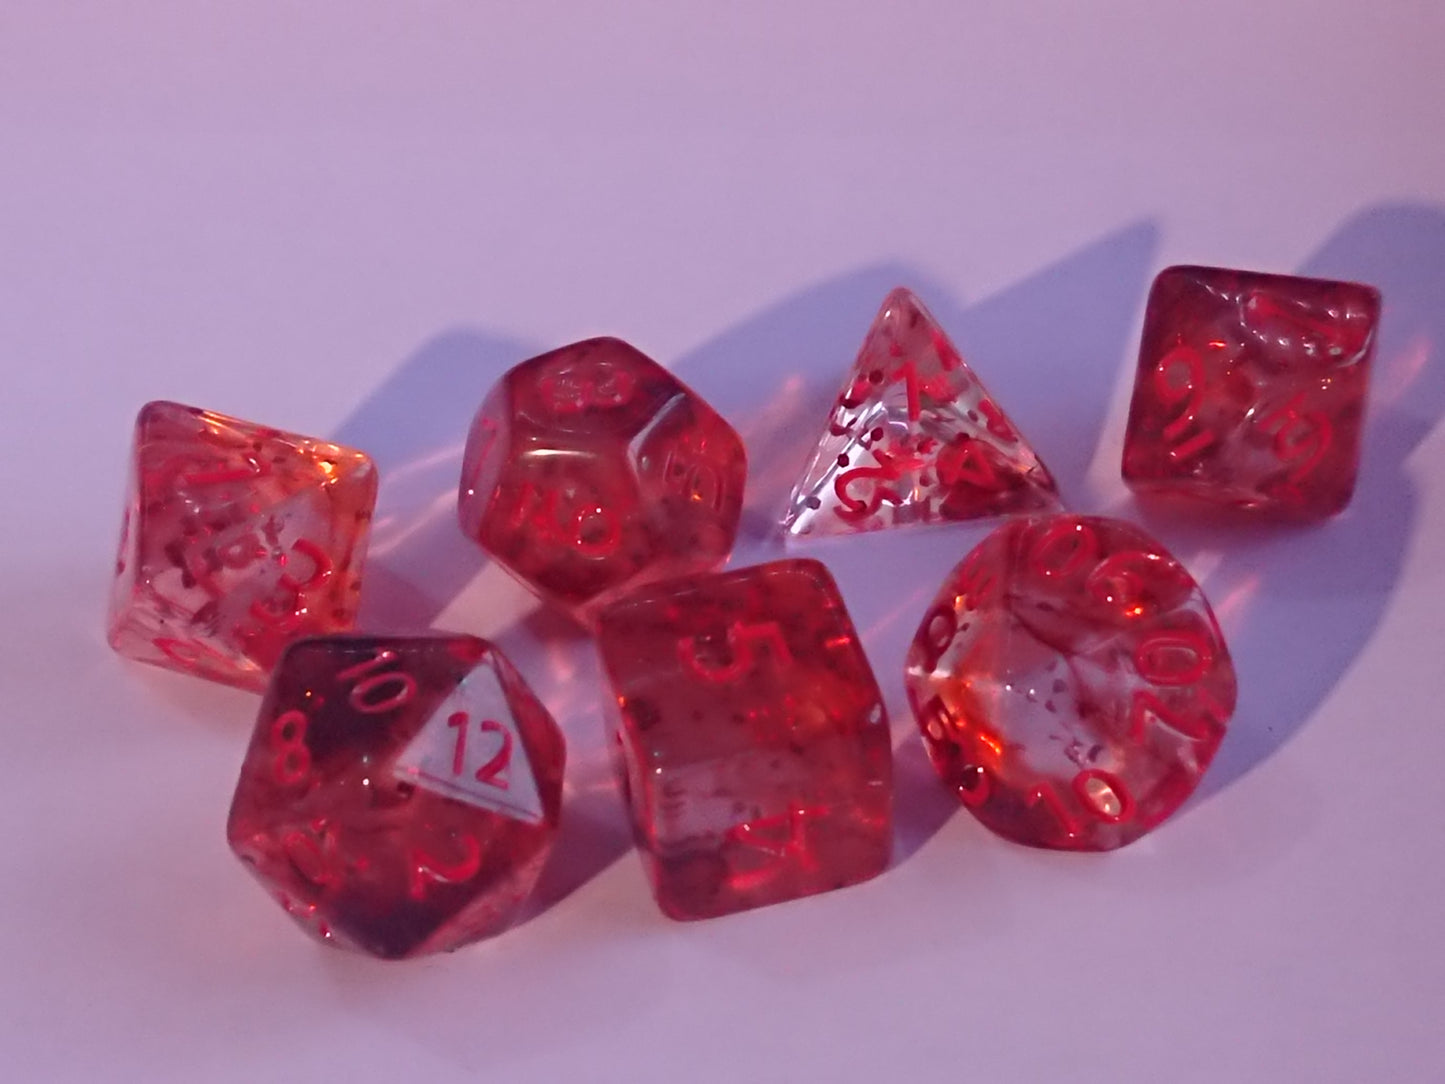 Sanguine Jelly Polyhedral Dice